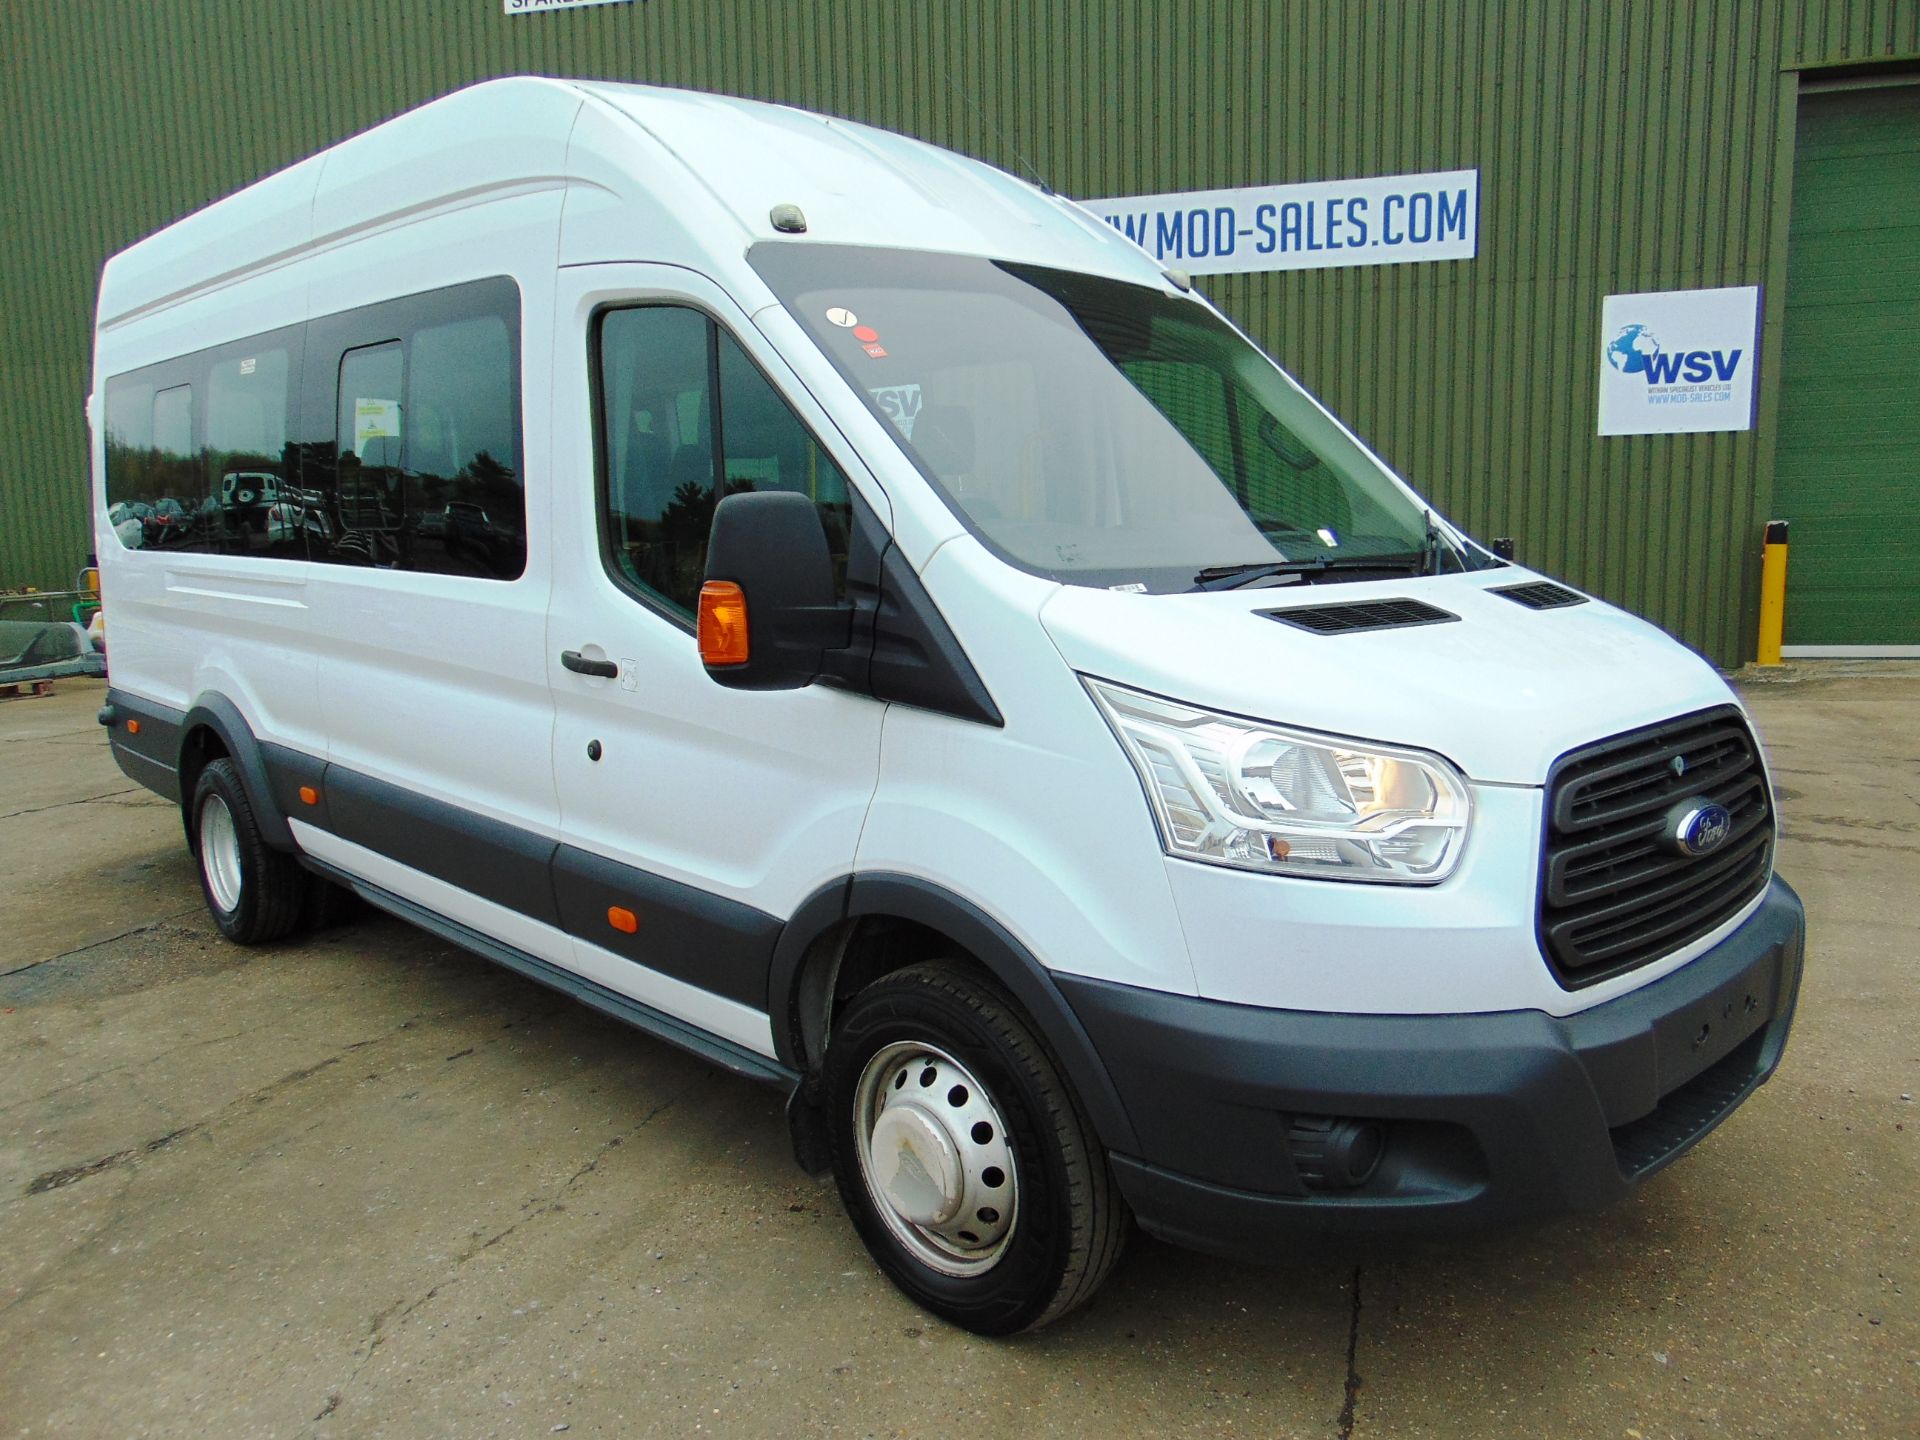 2014 Ford Transit 2.2 TDCi 460E 17 Seat Minibus ONLY 74,813 km! - Image 2 of 36